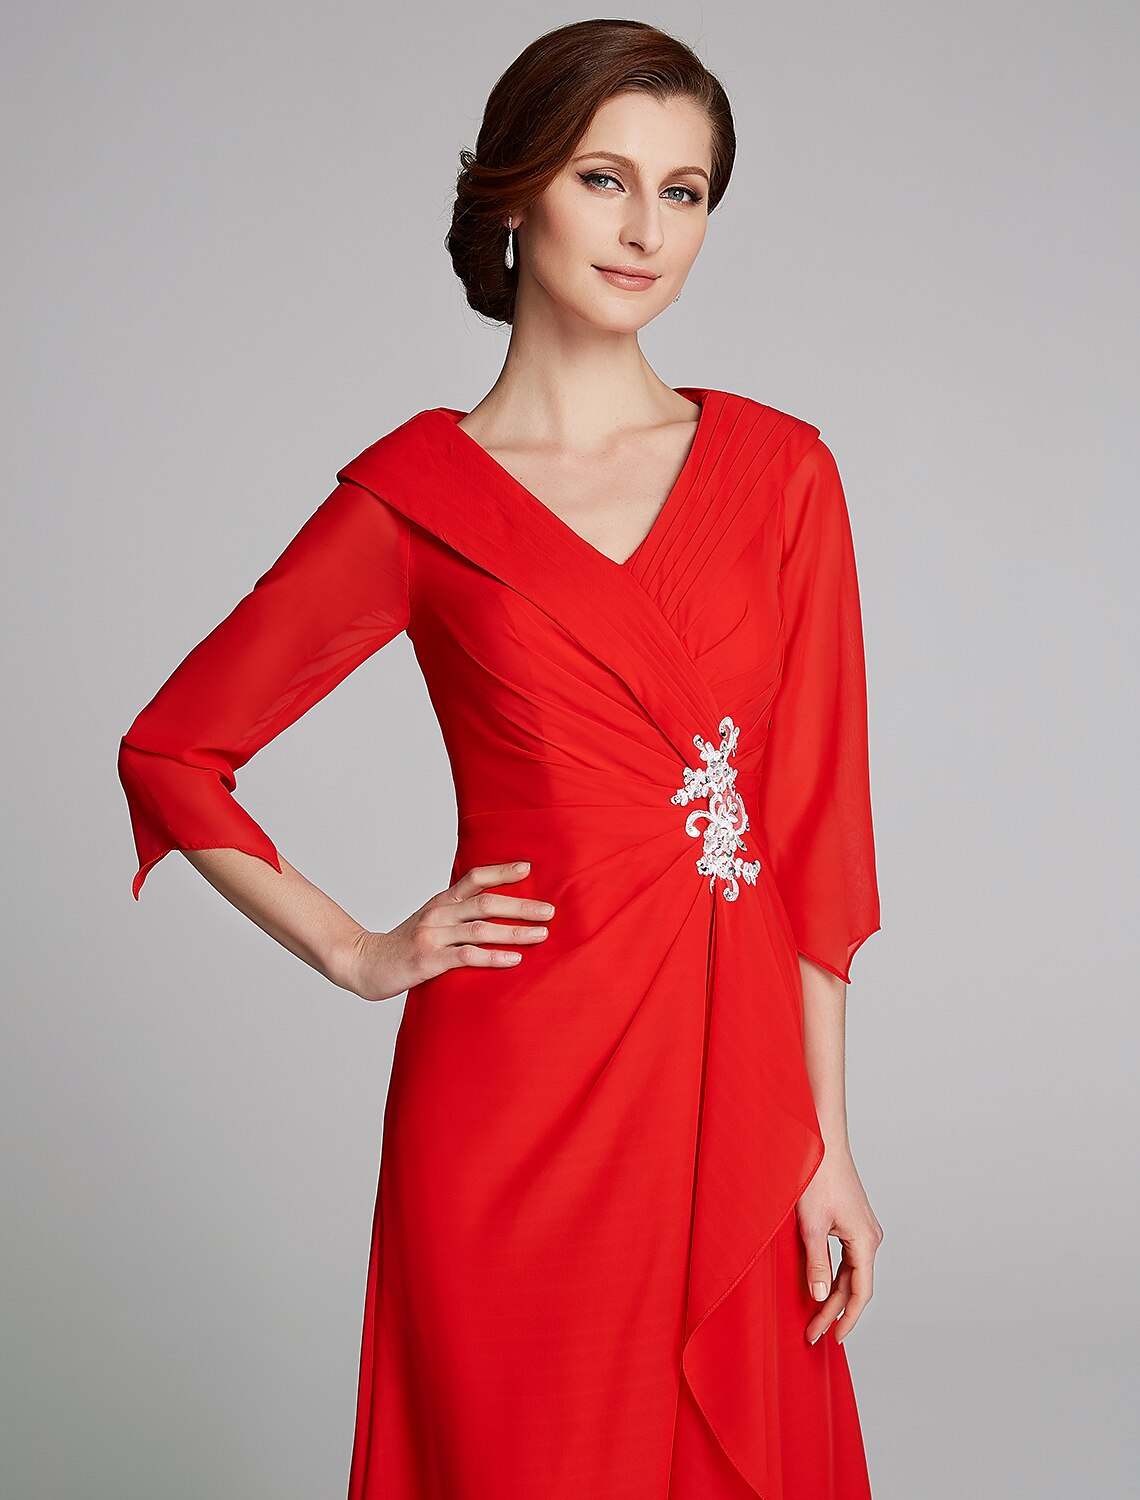 A-Line Mother of the Bride Dress Elegant V Neck Floor Length Chiffon Half Sleeve with Pleats Appliques